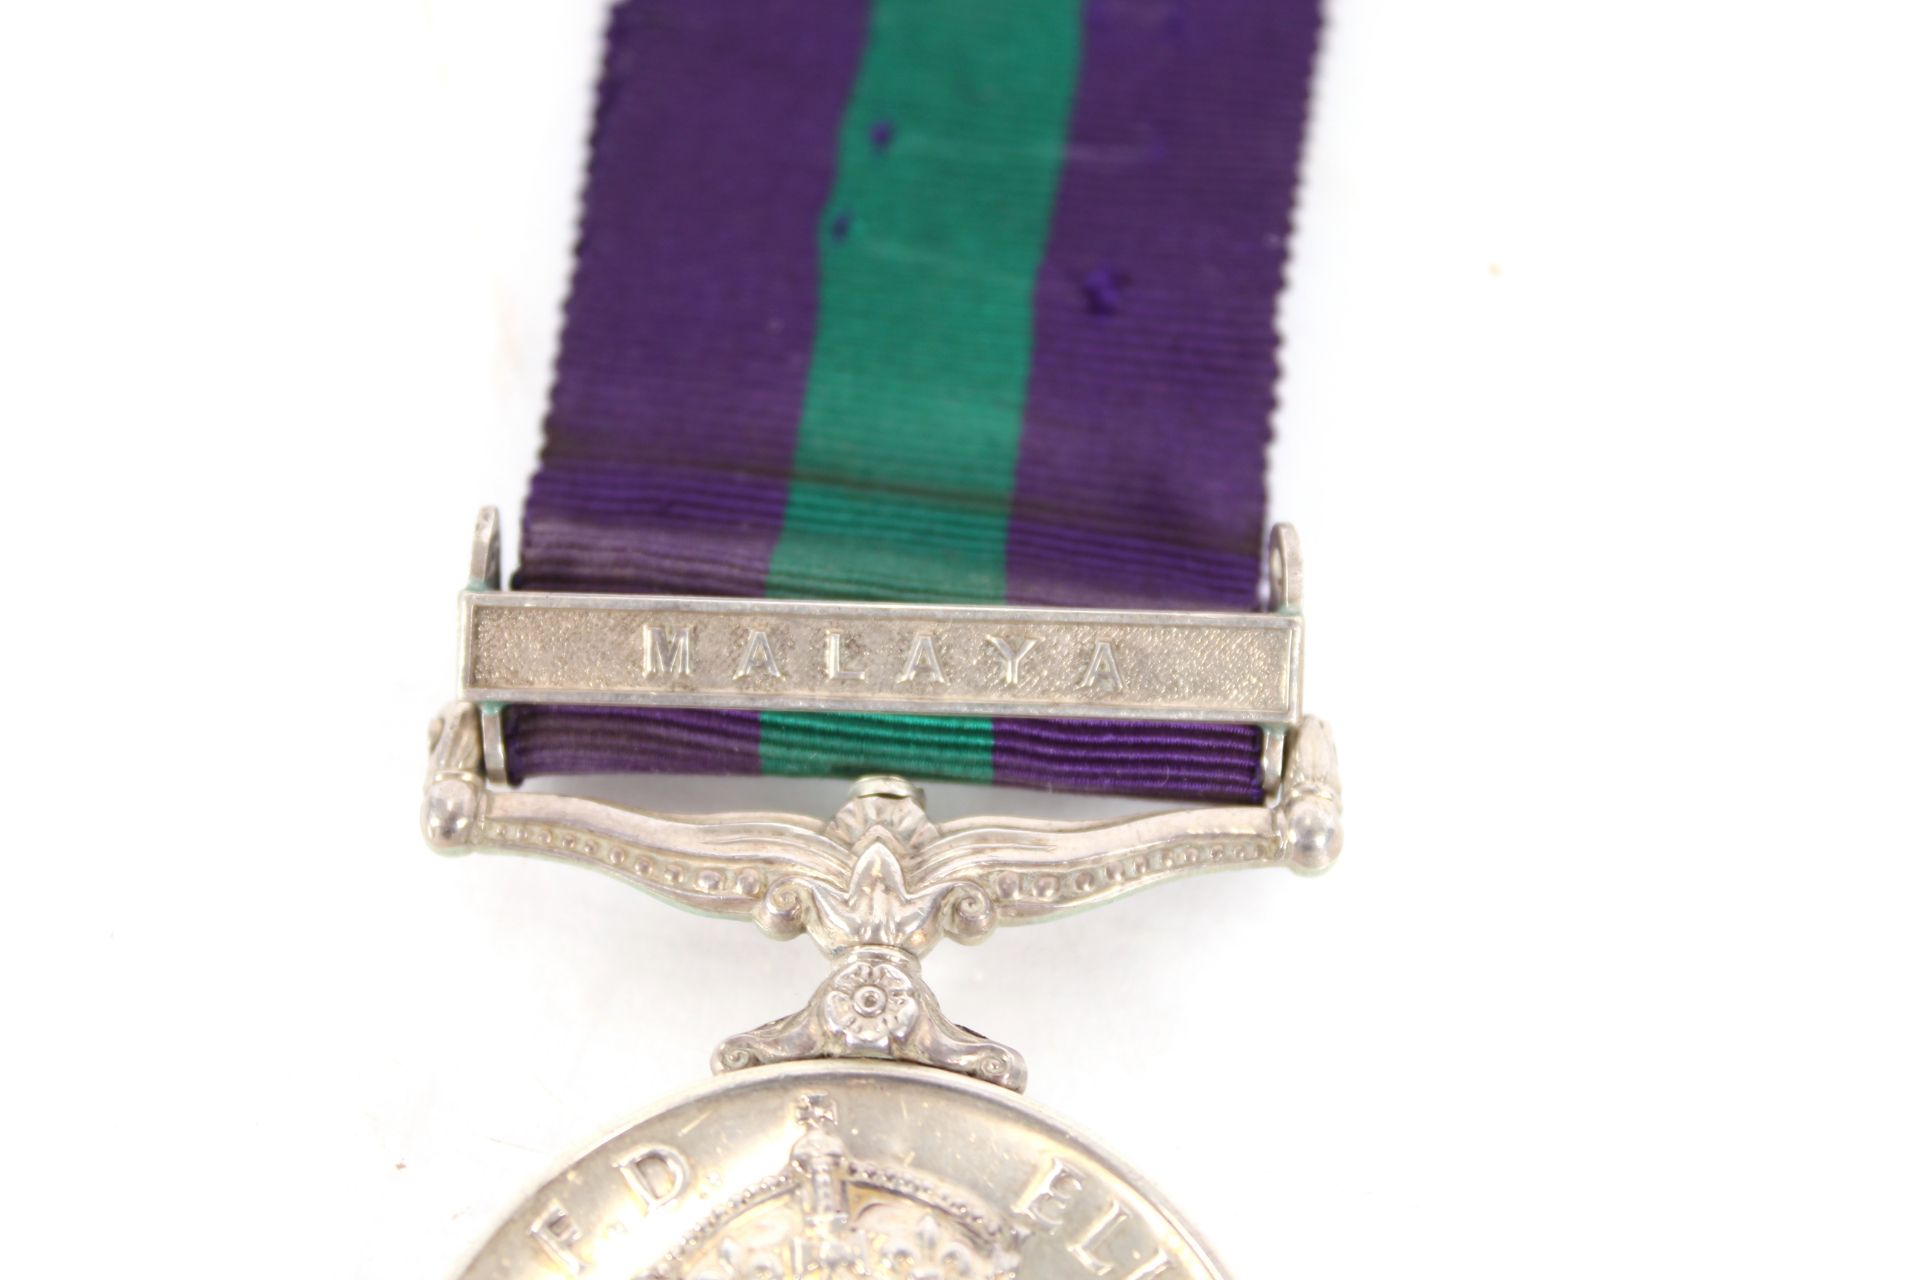 A QEII G.S.M. with Malaya clasp to 23677467 Pte. K - Image 4 of 4